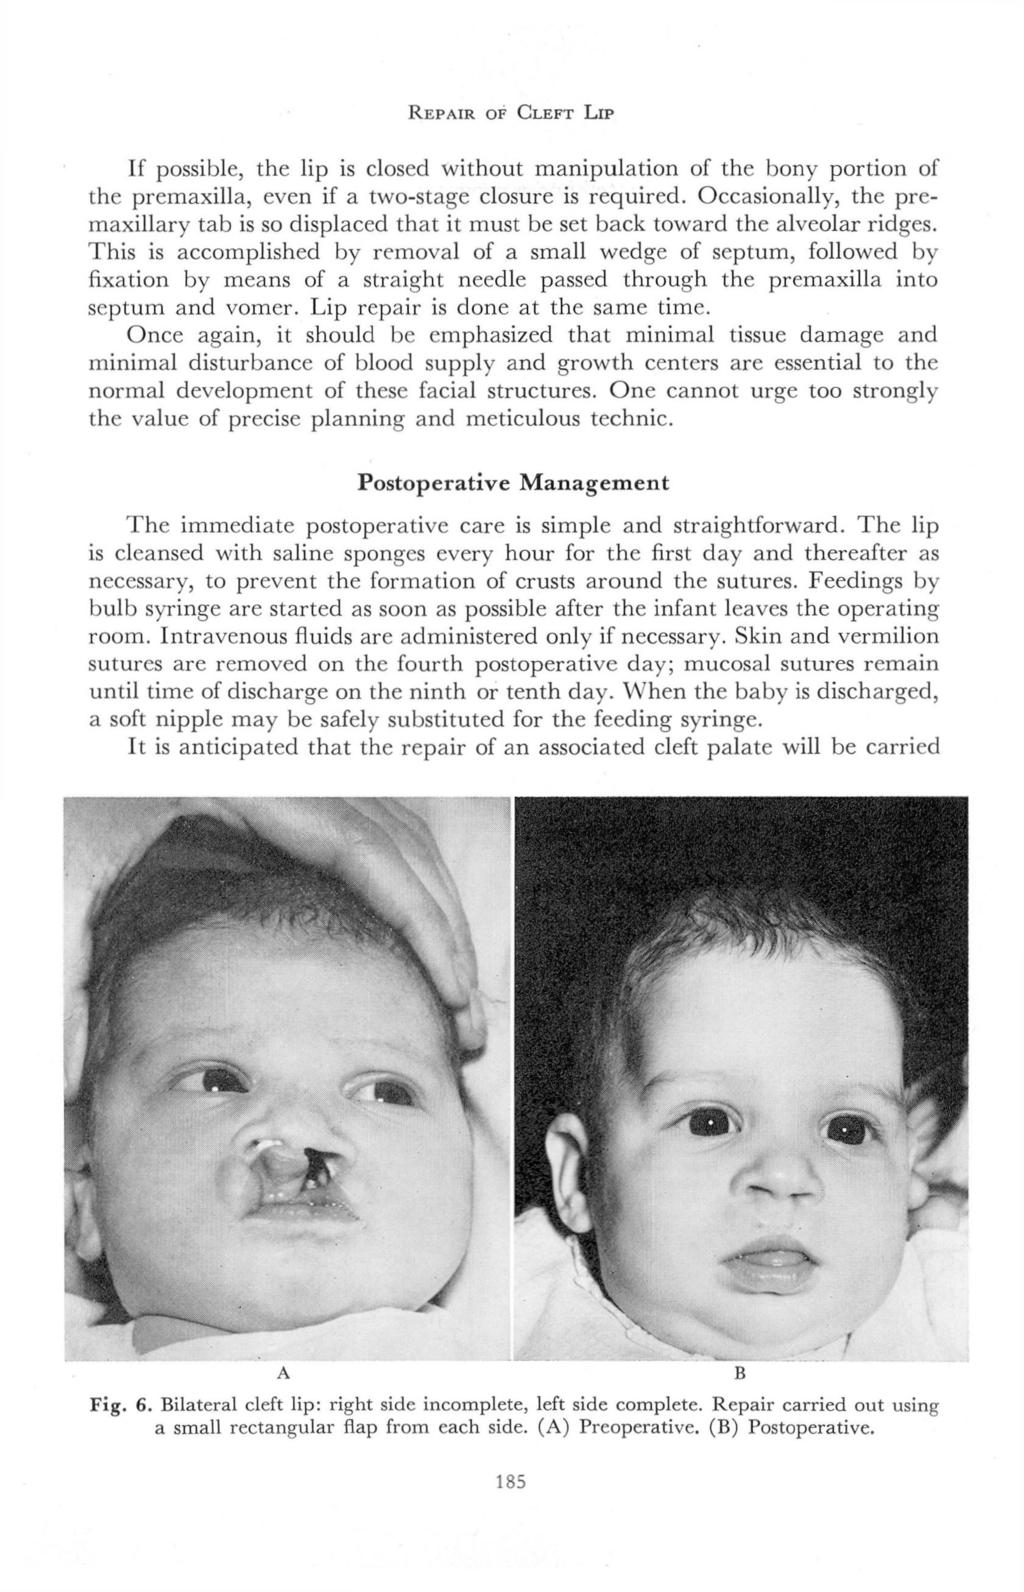 REPAIR OF CLEFT LIP If possible, the lip is closed without manipulation of the bony portion of the premaxilla, even if a two-stage closure is required.